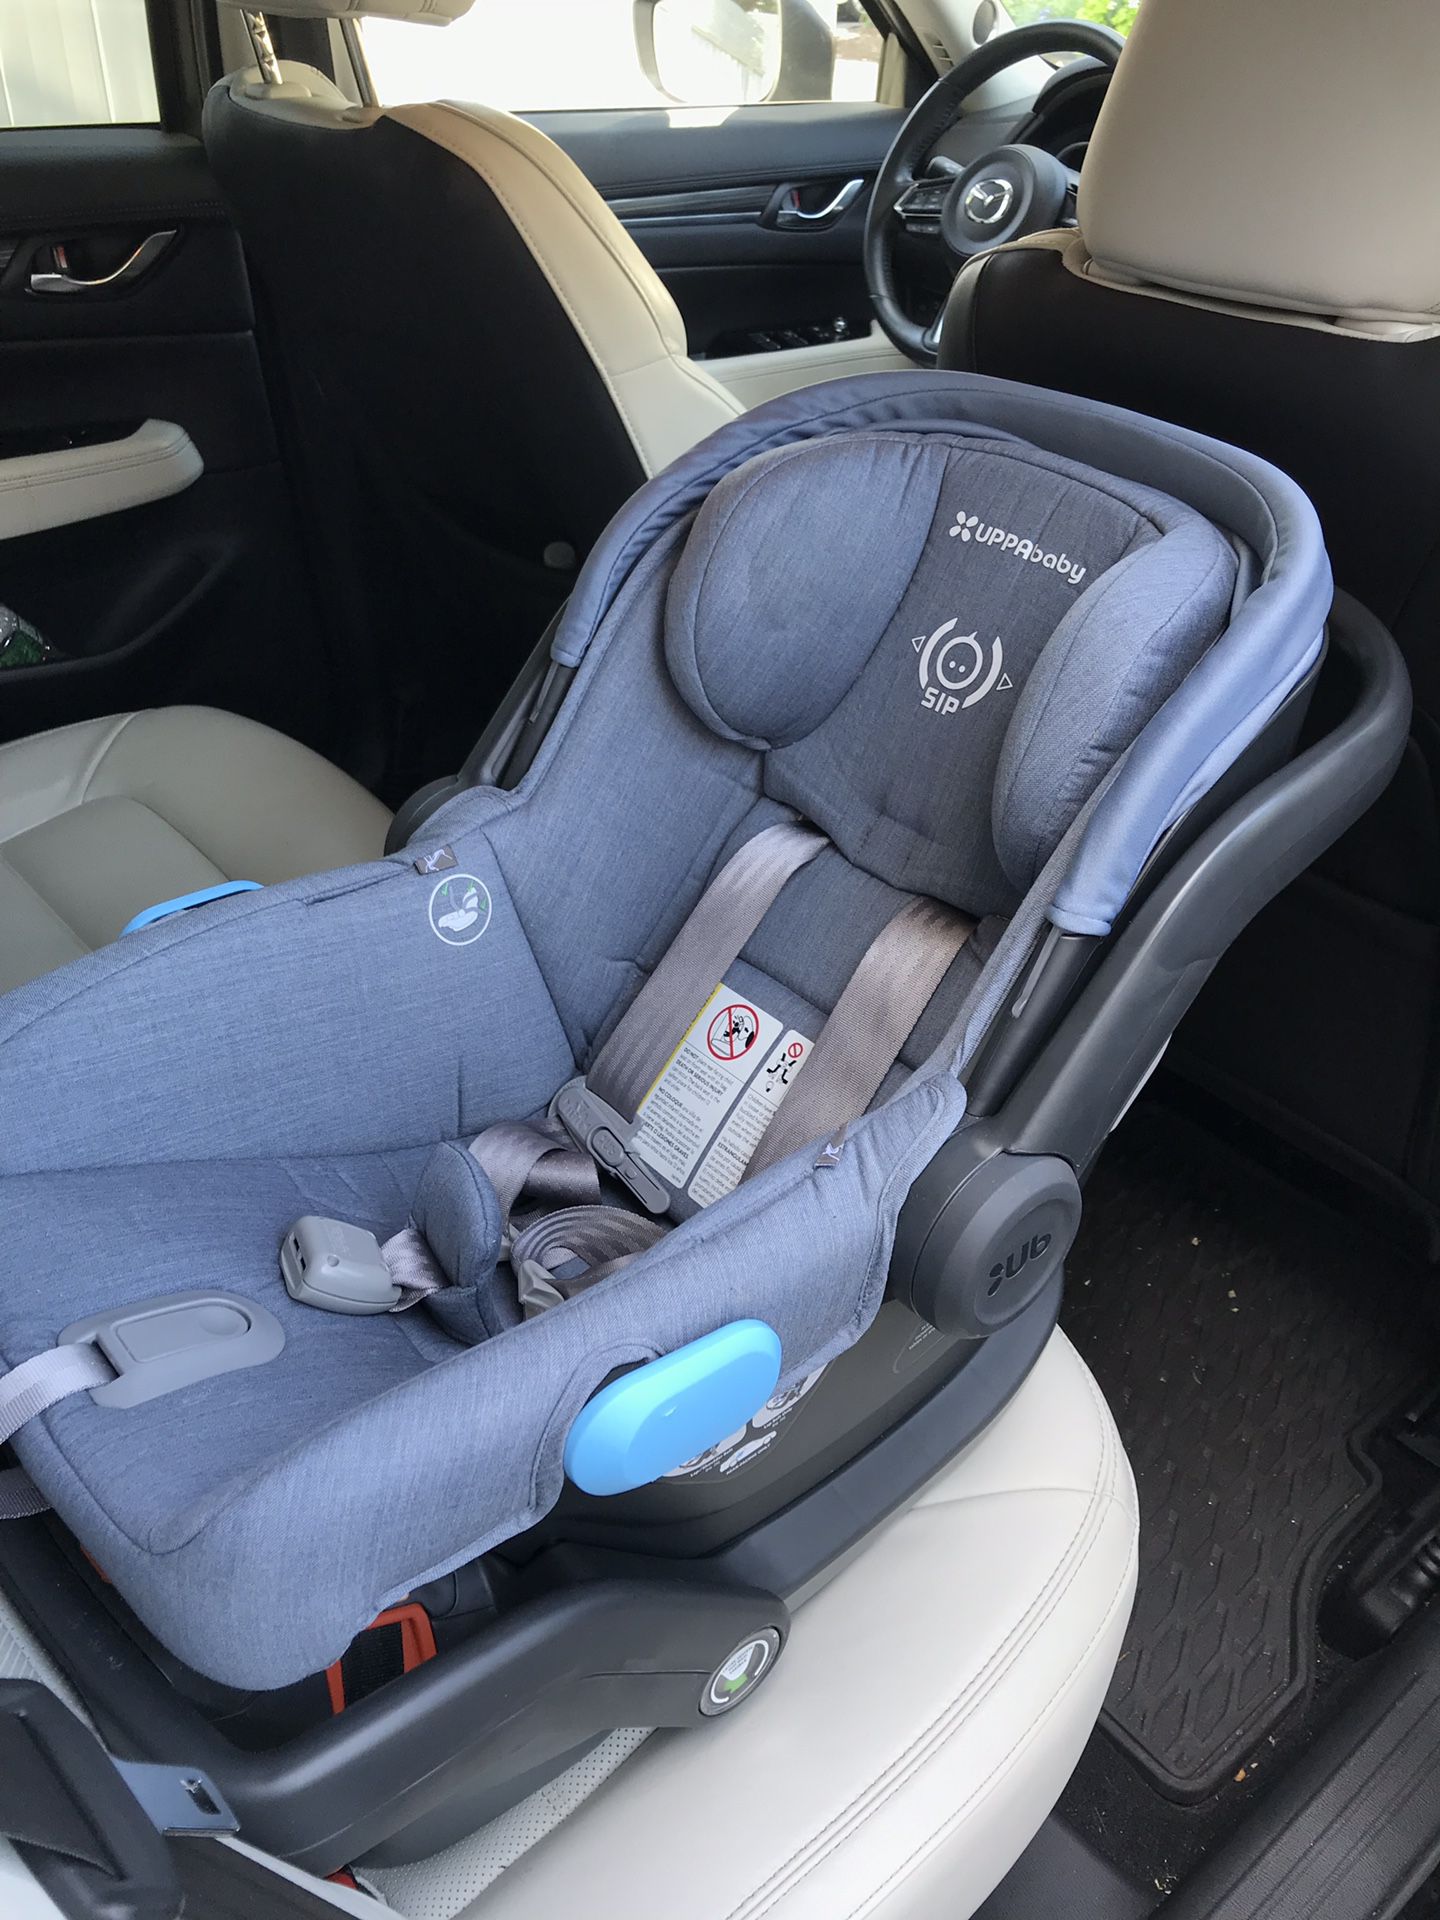 UPPAbaby Mesa Infant car seat and a travel bag